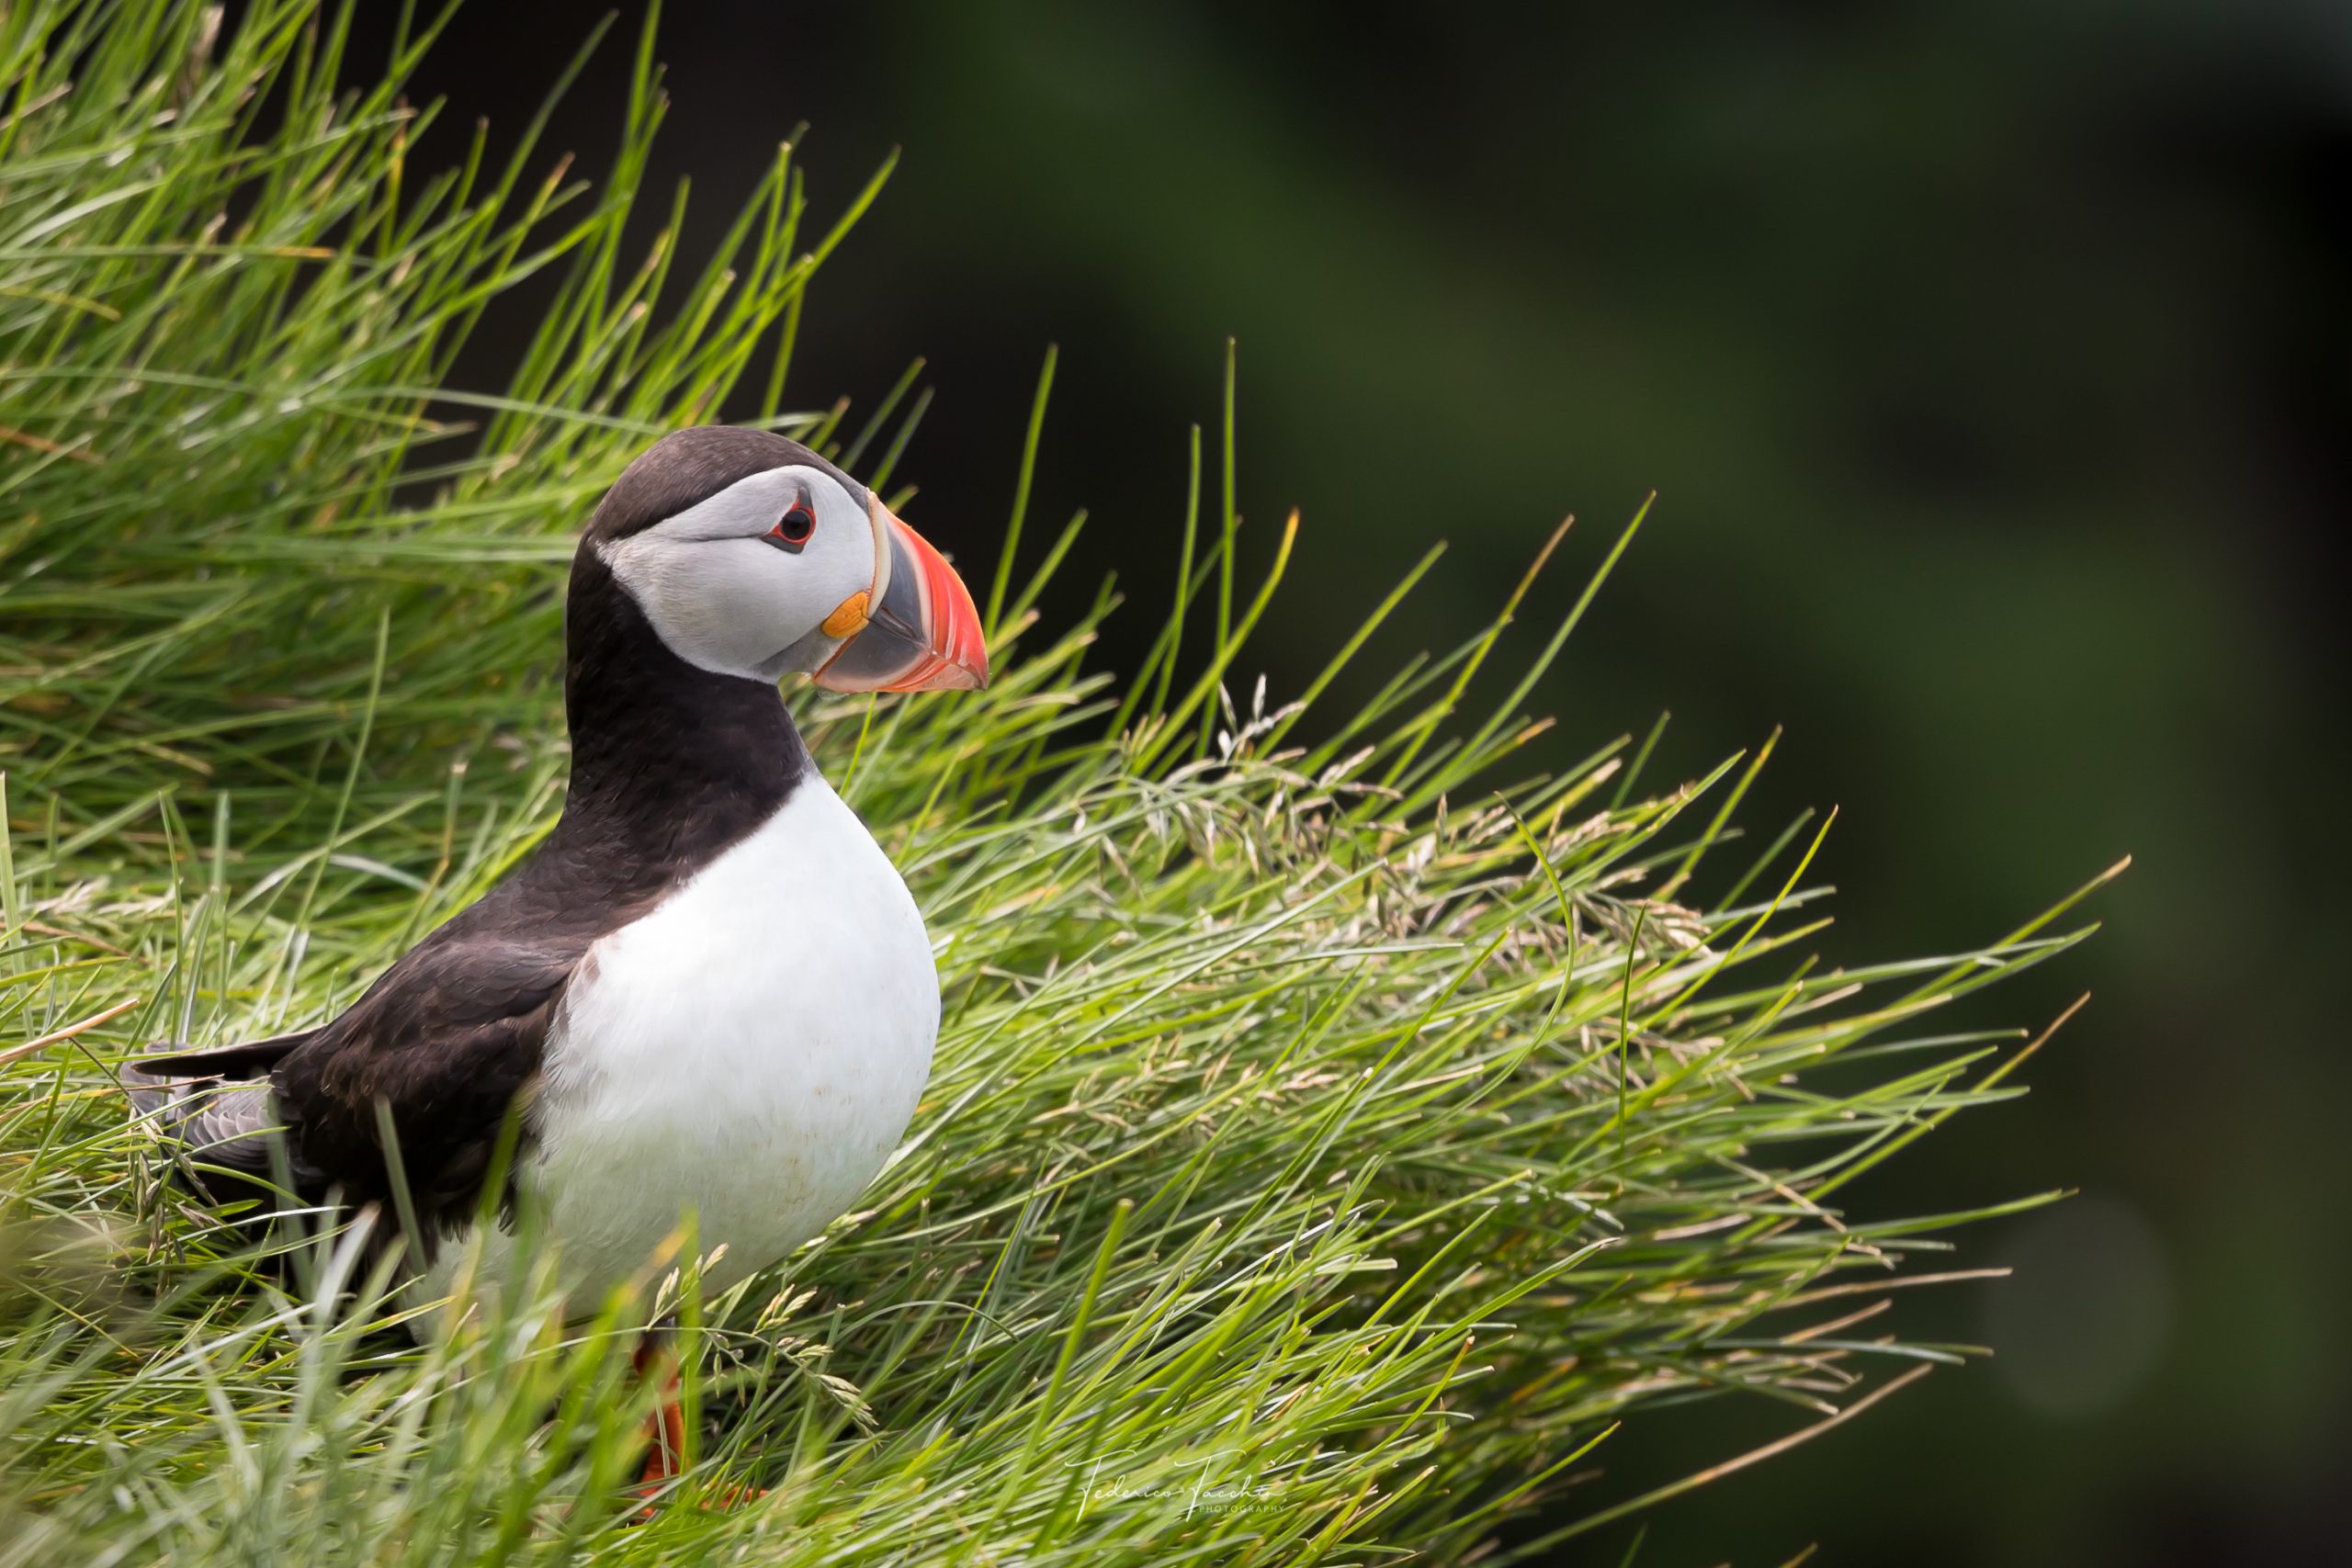 Puffins in Iceland: How, When and Where to See Them